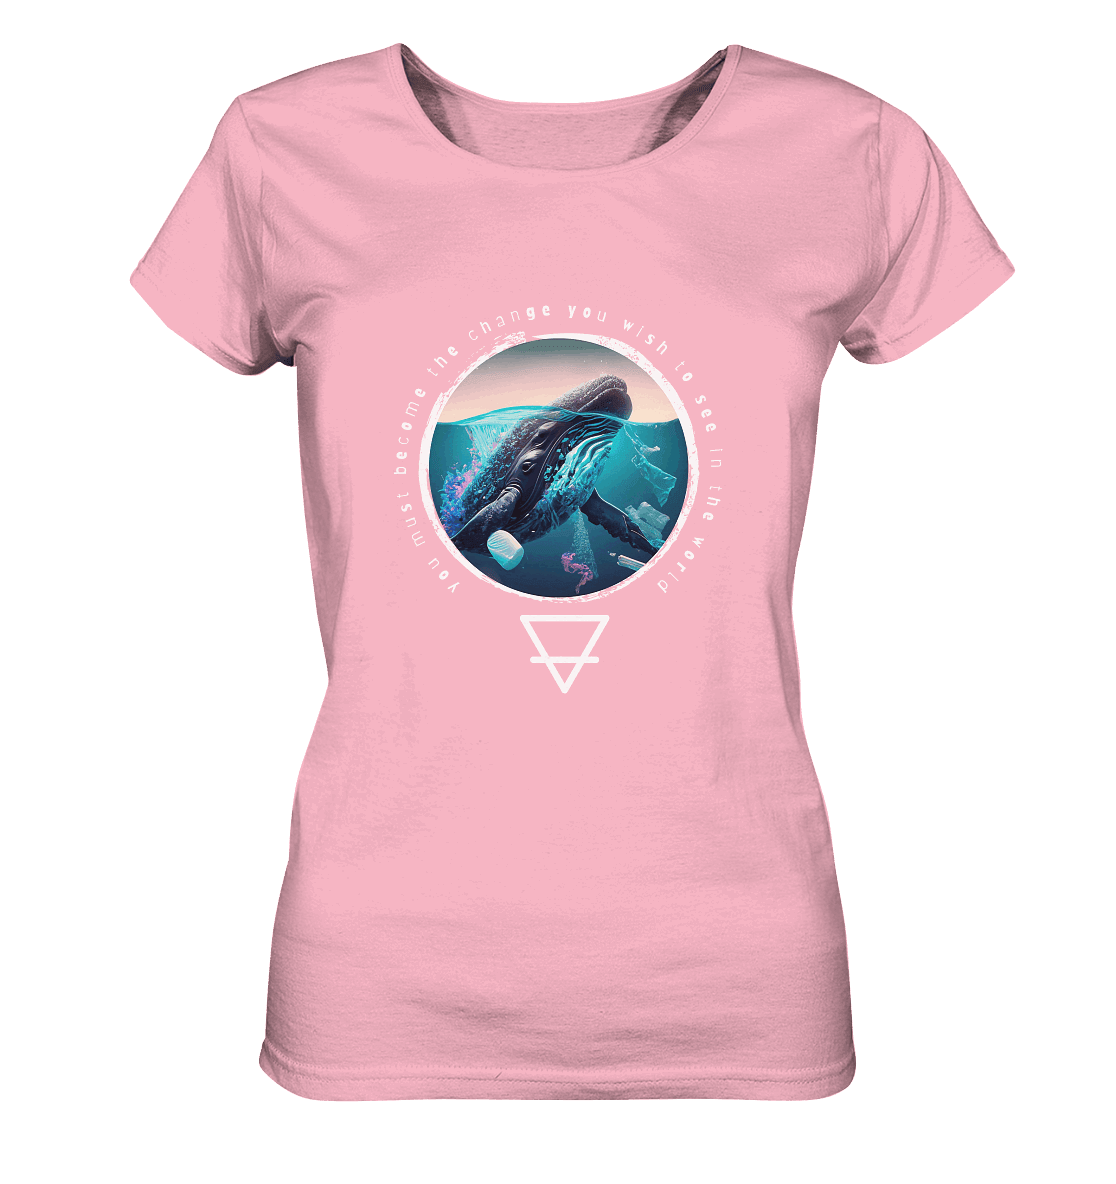 Nature - You must become the change you wish to see in the world  - Ladies Organic Shirt